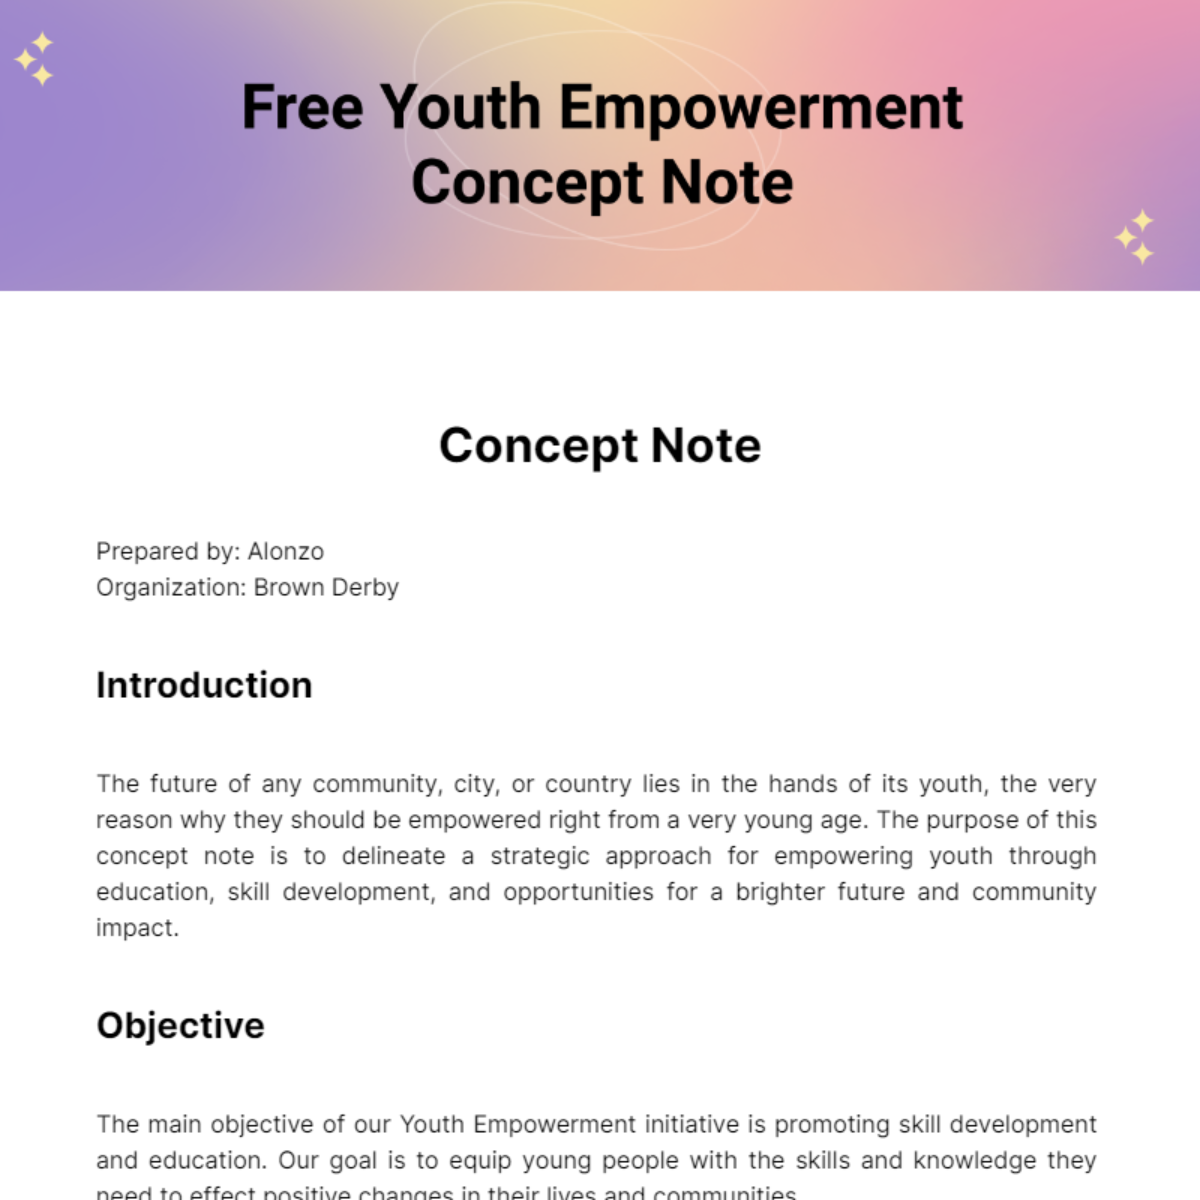 Free Youth Empowerment Concept Note Template